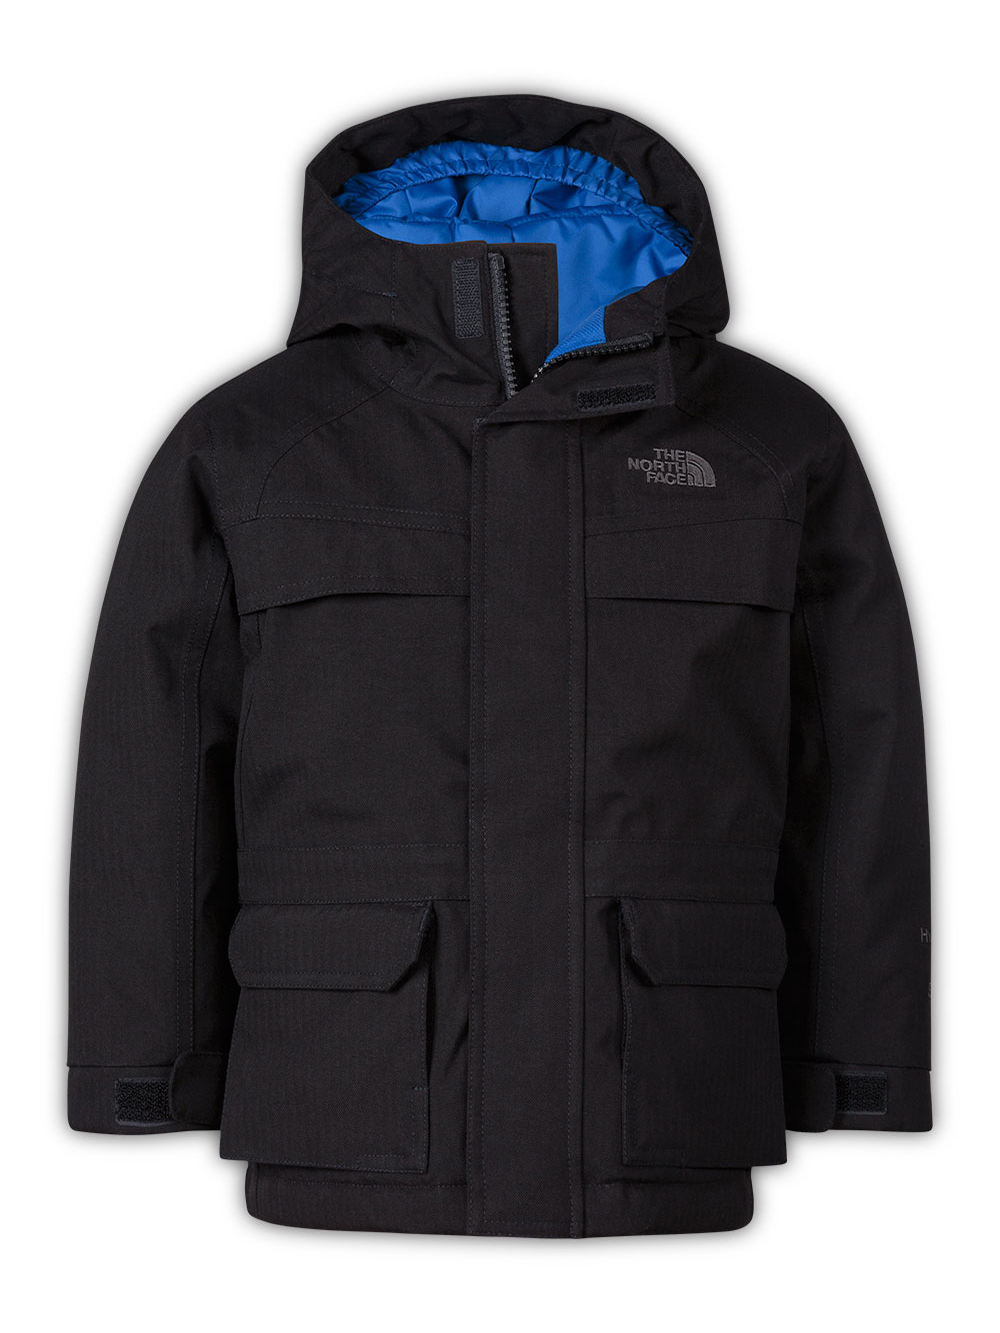 the north face boys winter coats Online 